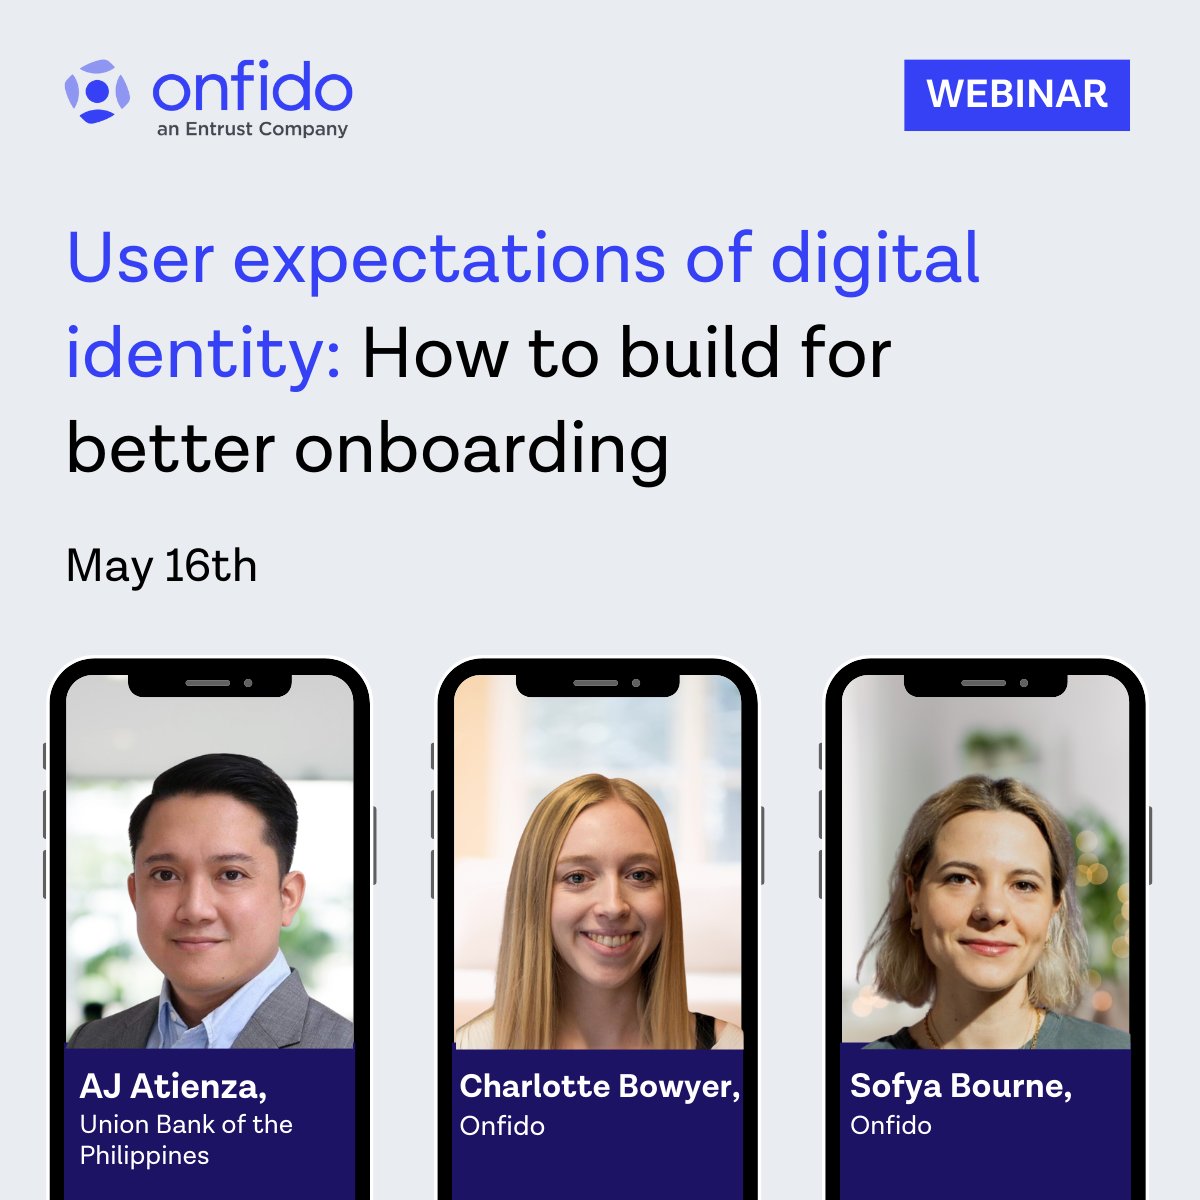 Learn the secrets behind effective digital onboarding in our upcoming webinar with experts from @unionbankph and @Onfido! Register today: 🌍 Europe: bit.ly/3yey45l 🌎 Americas: bit.ly/3QBKpXG 🌏 Asia-Pacific: bit.ly/3UQeB3D #DigitalOnboarding #UX